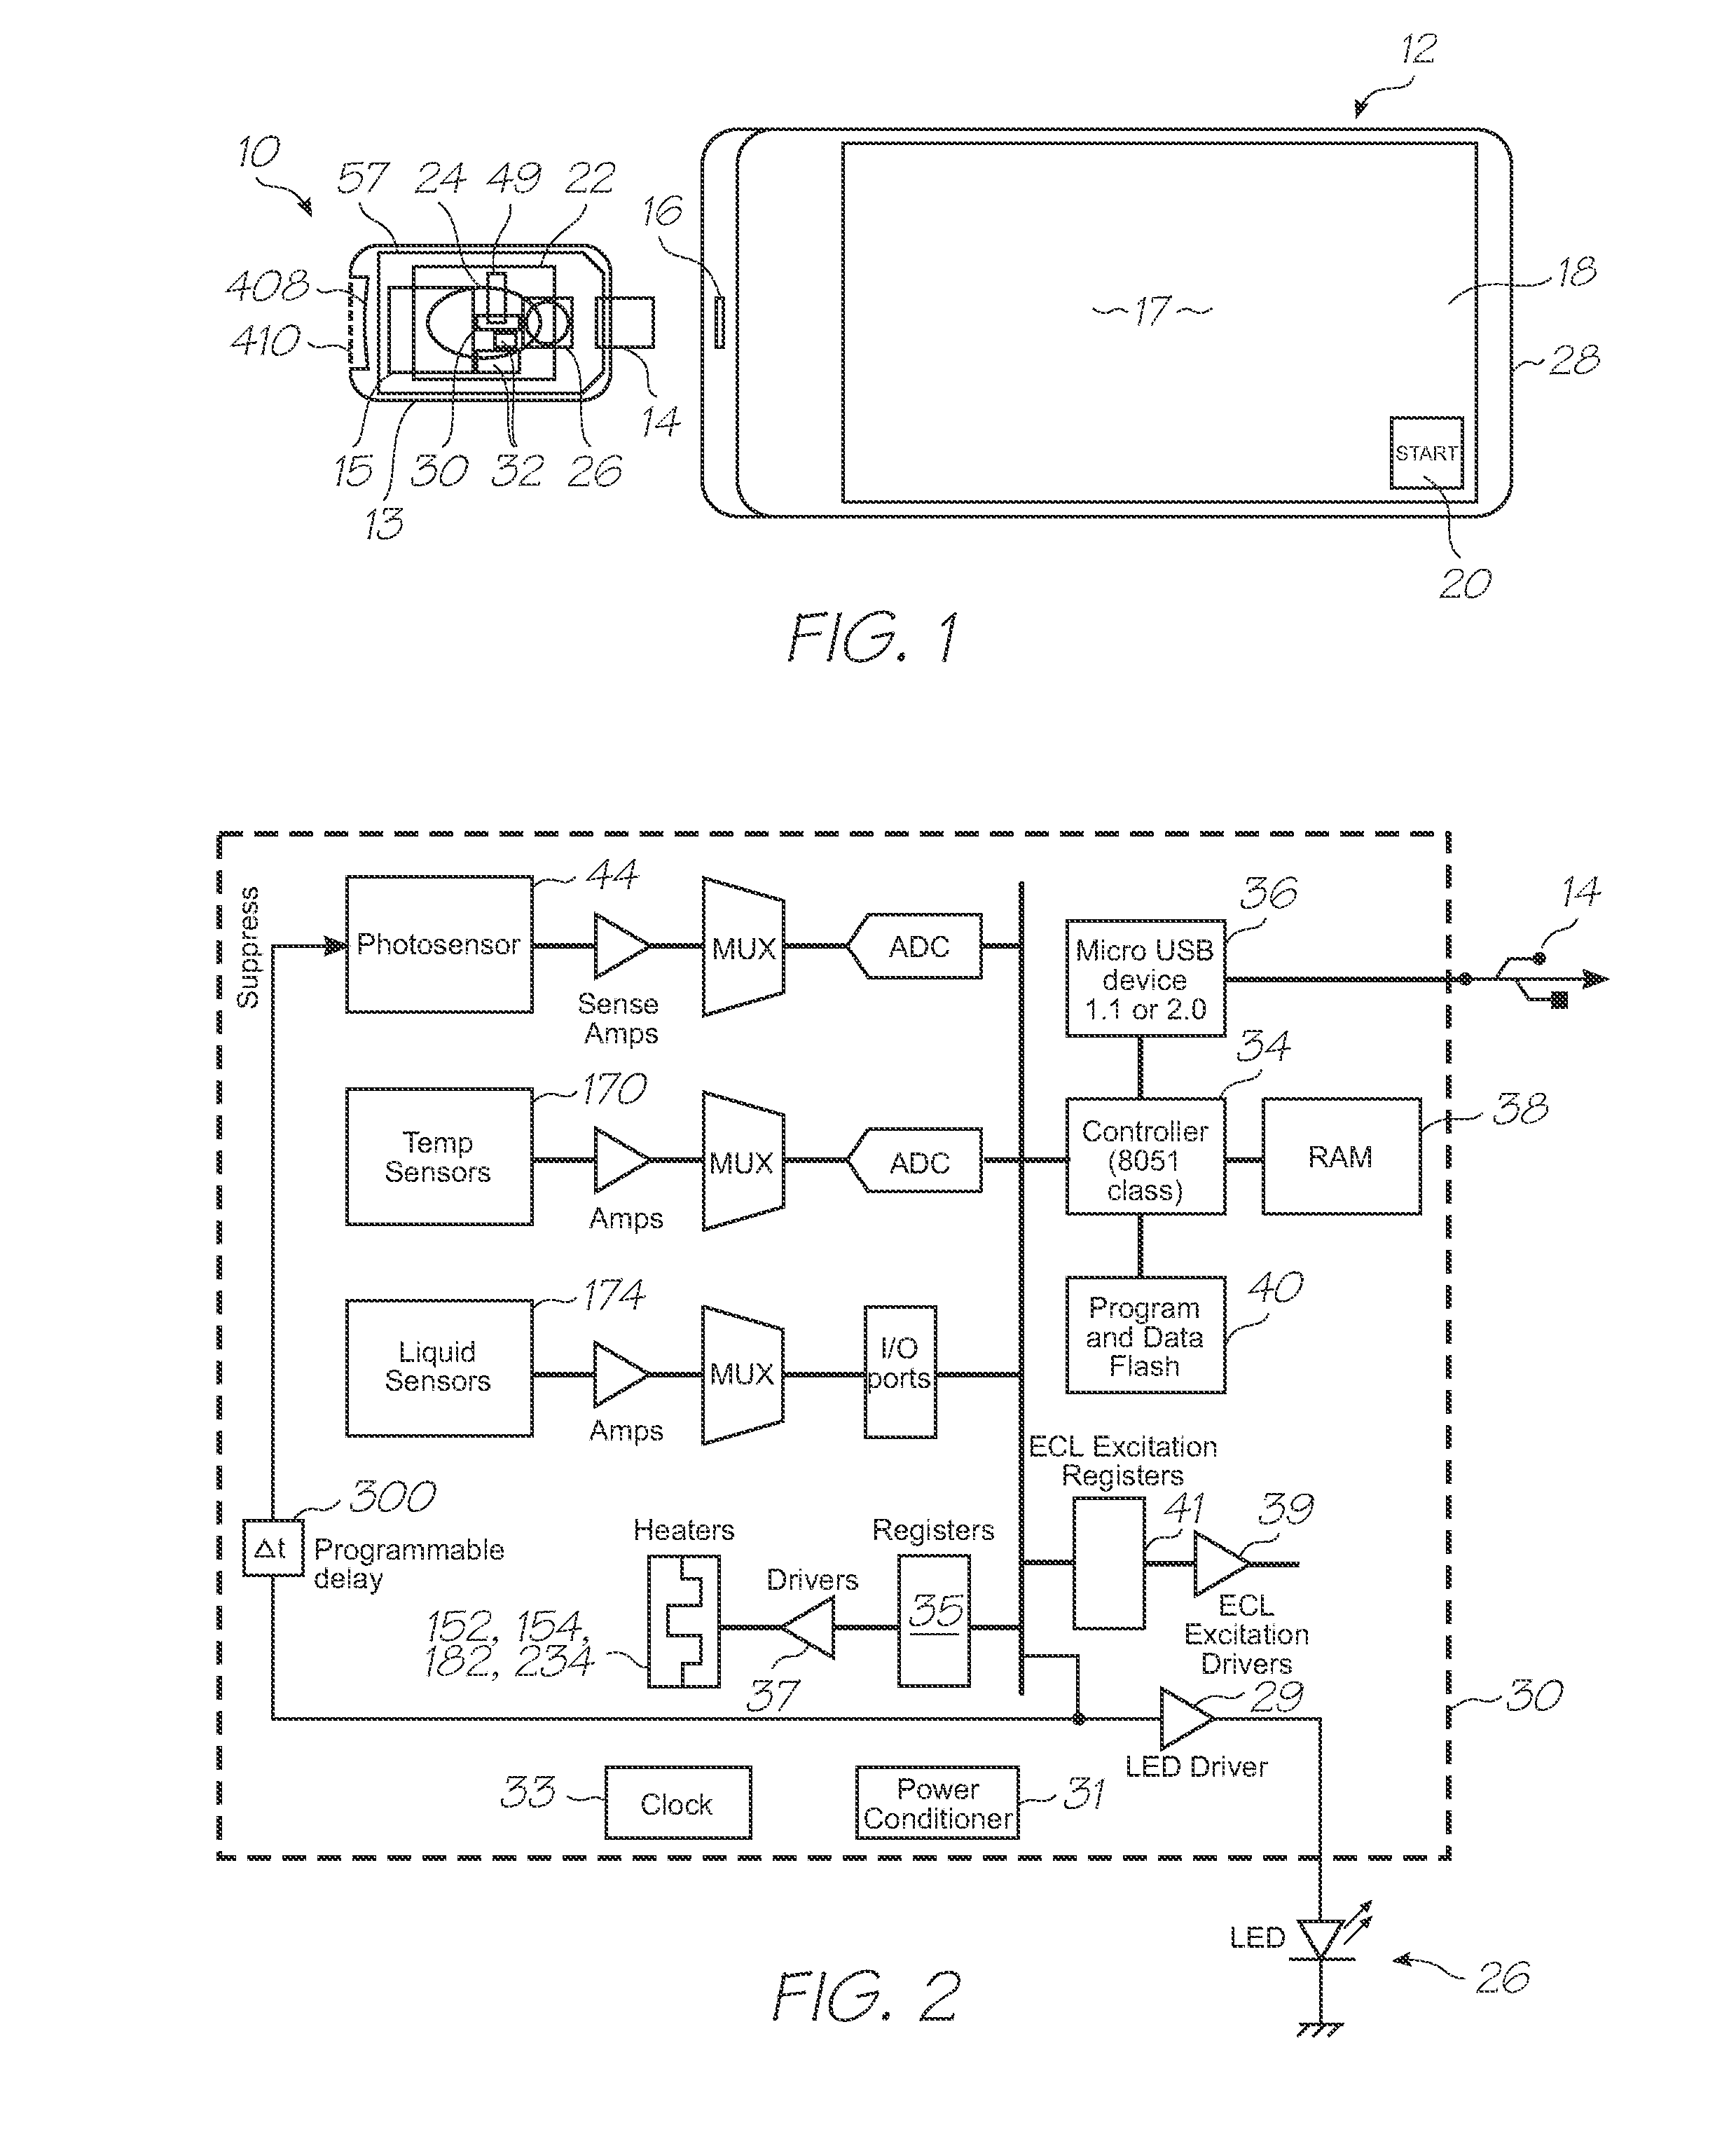 Microfluidic device with multi-layer dialysis section